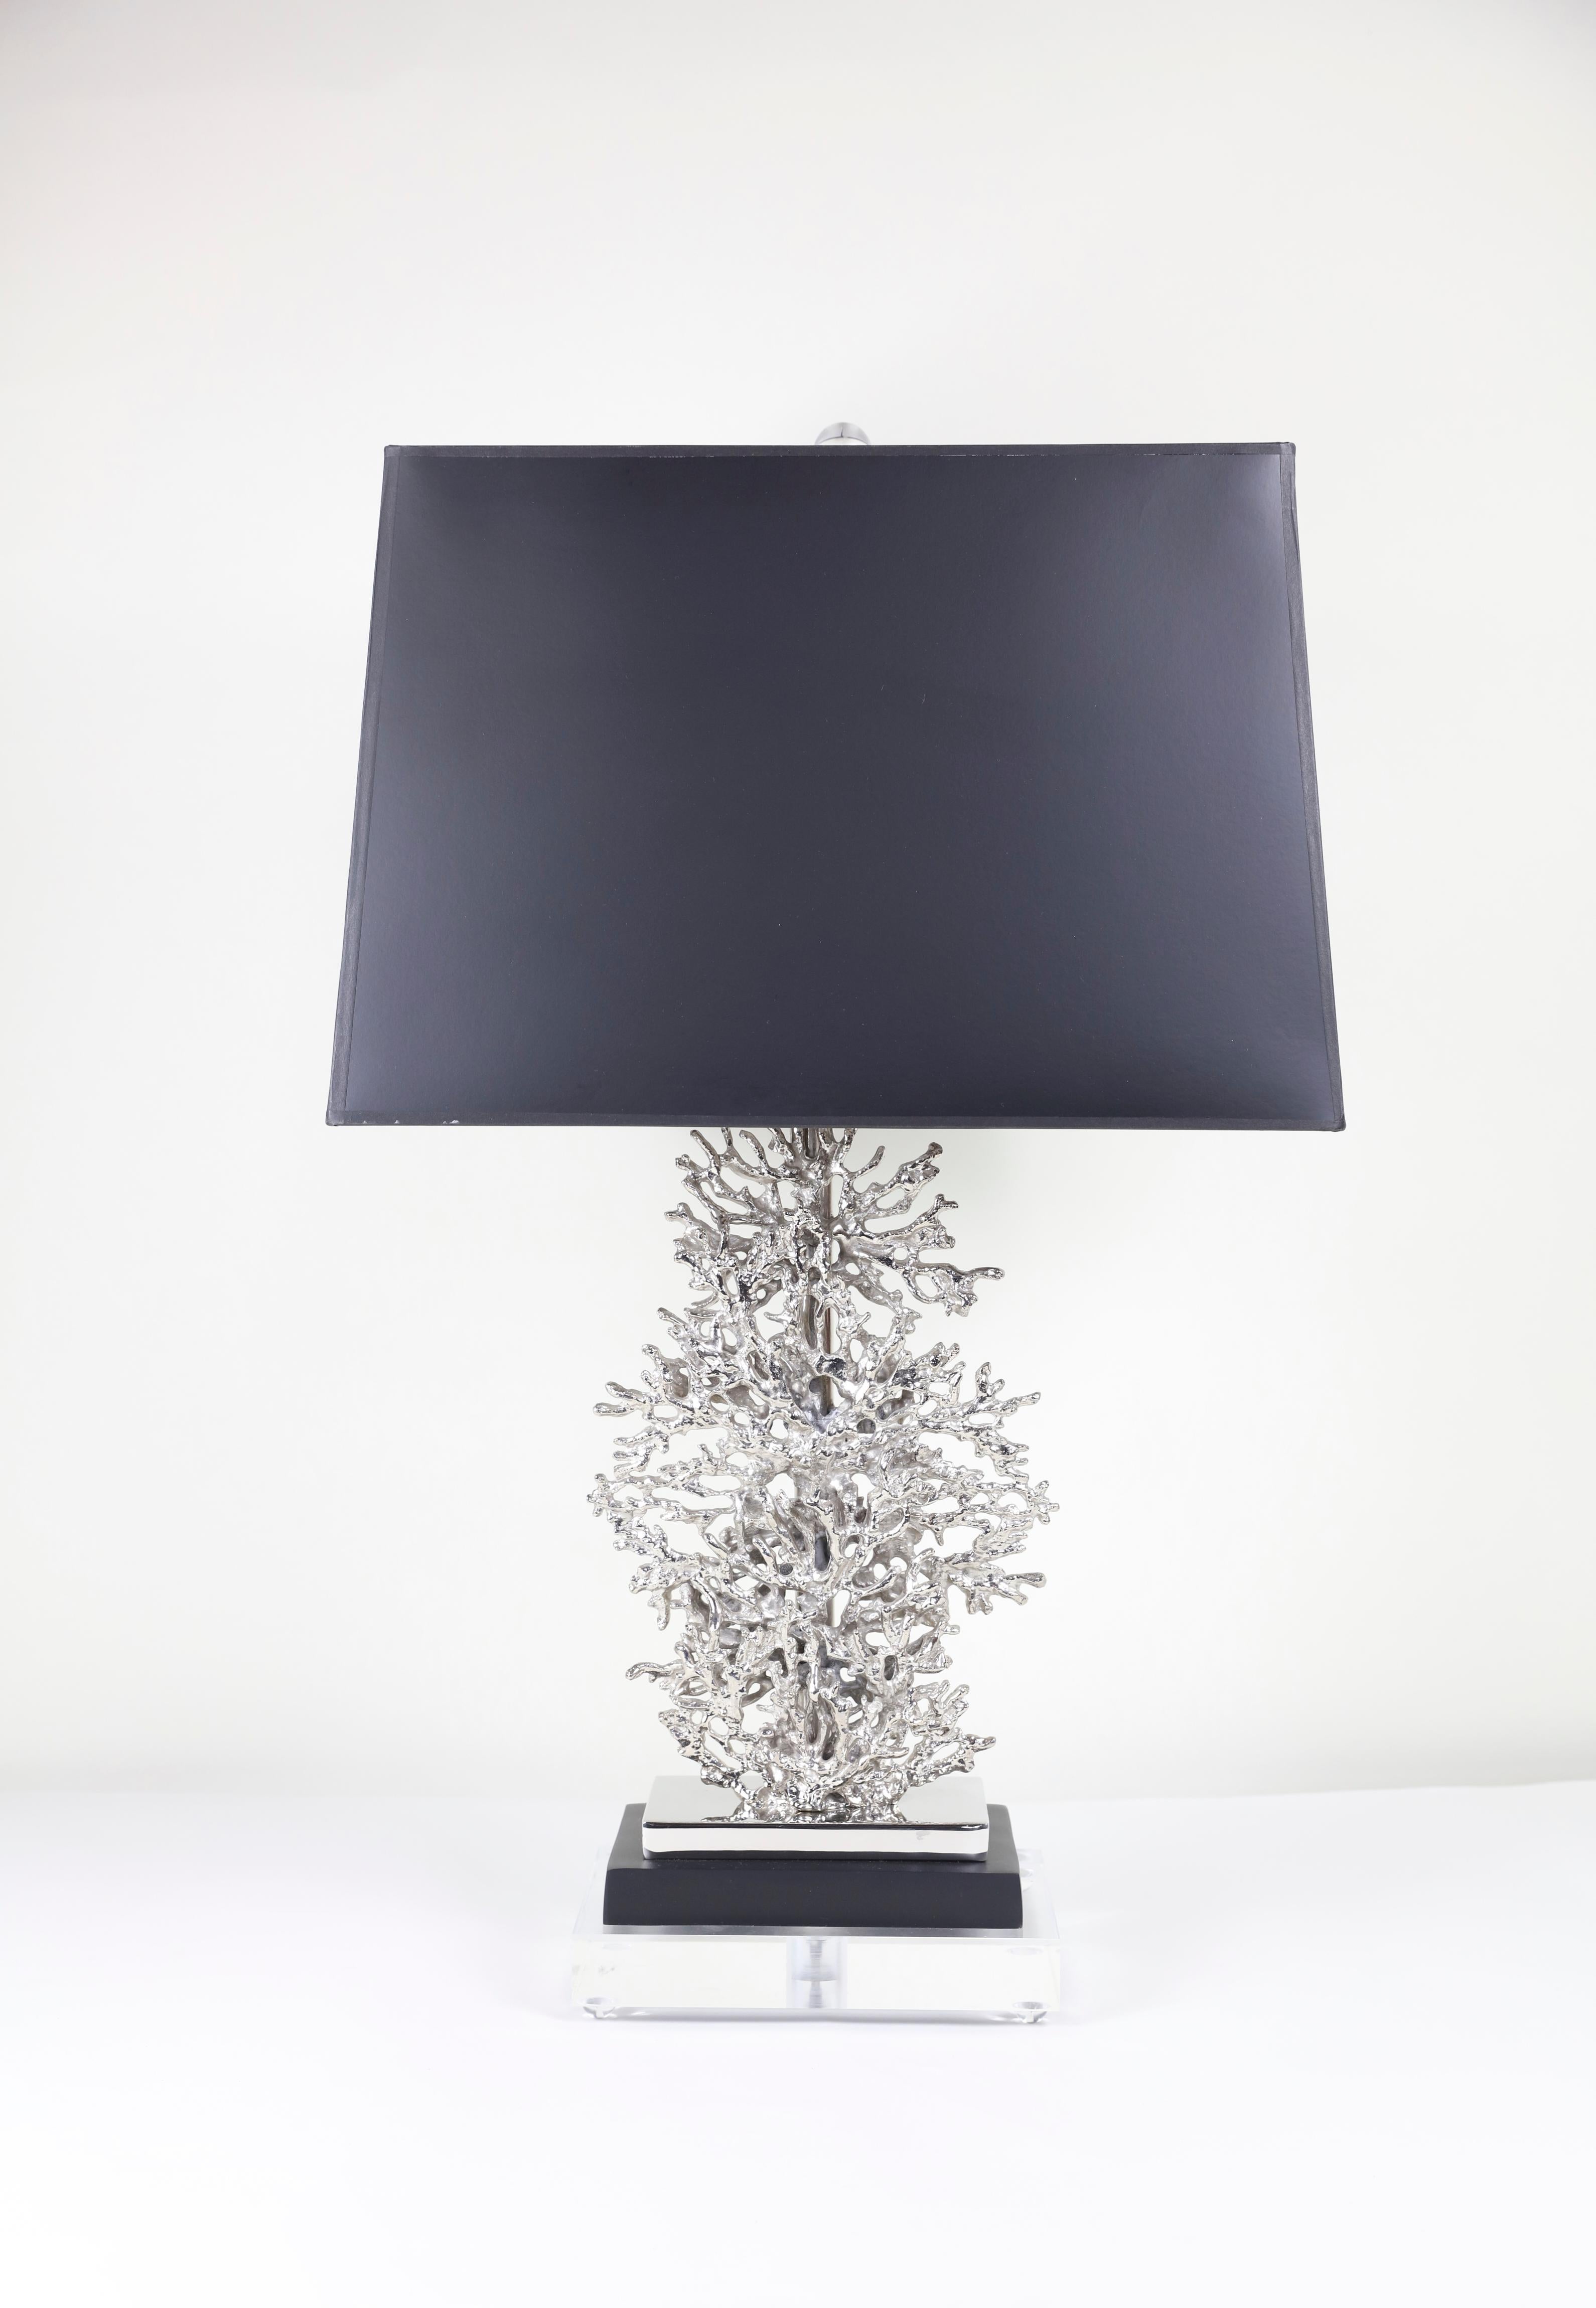 Pair of John Robshaw coral lamps silver with black shades 30